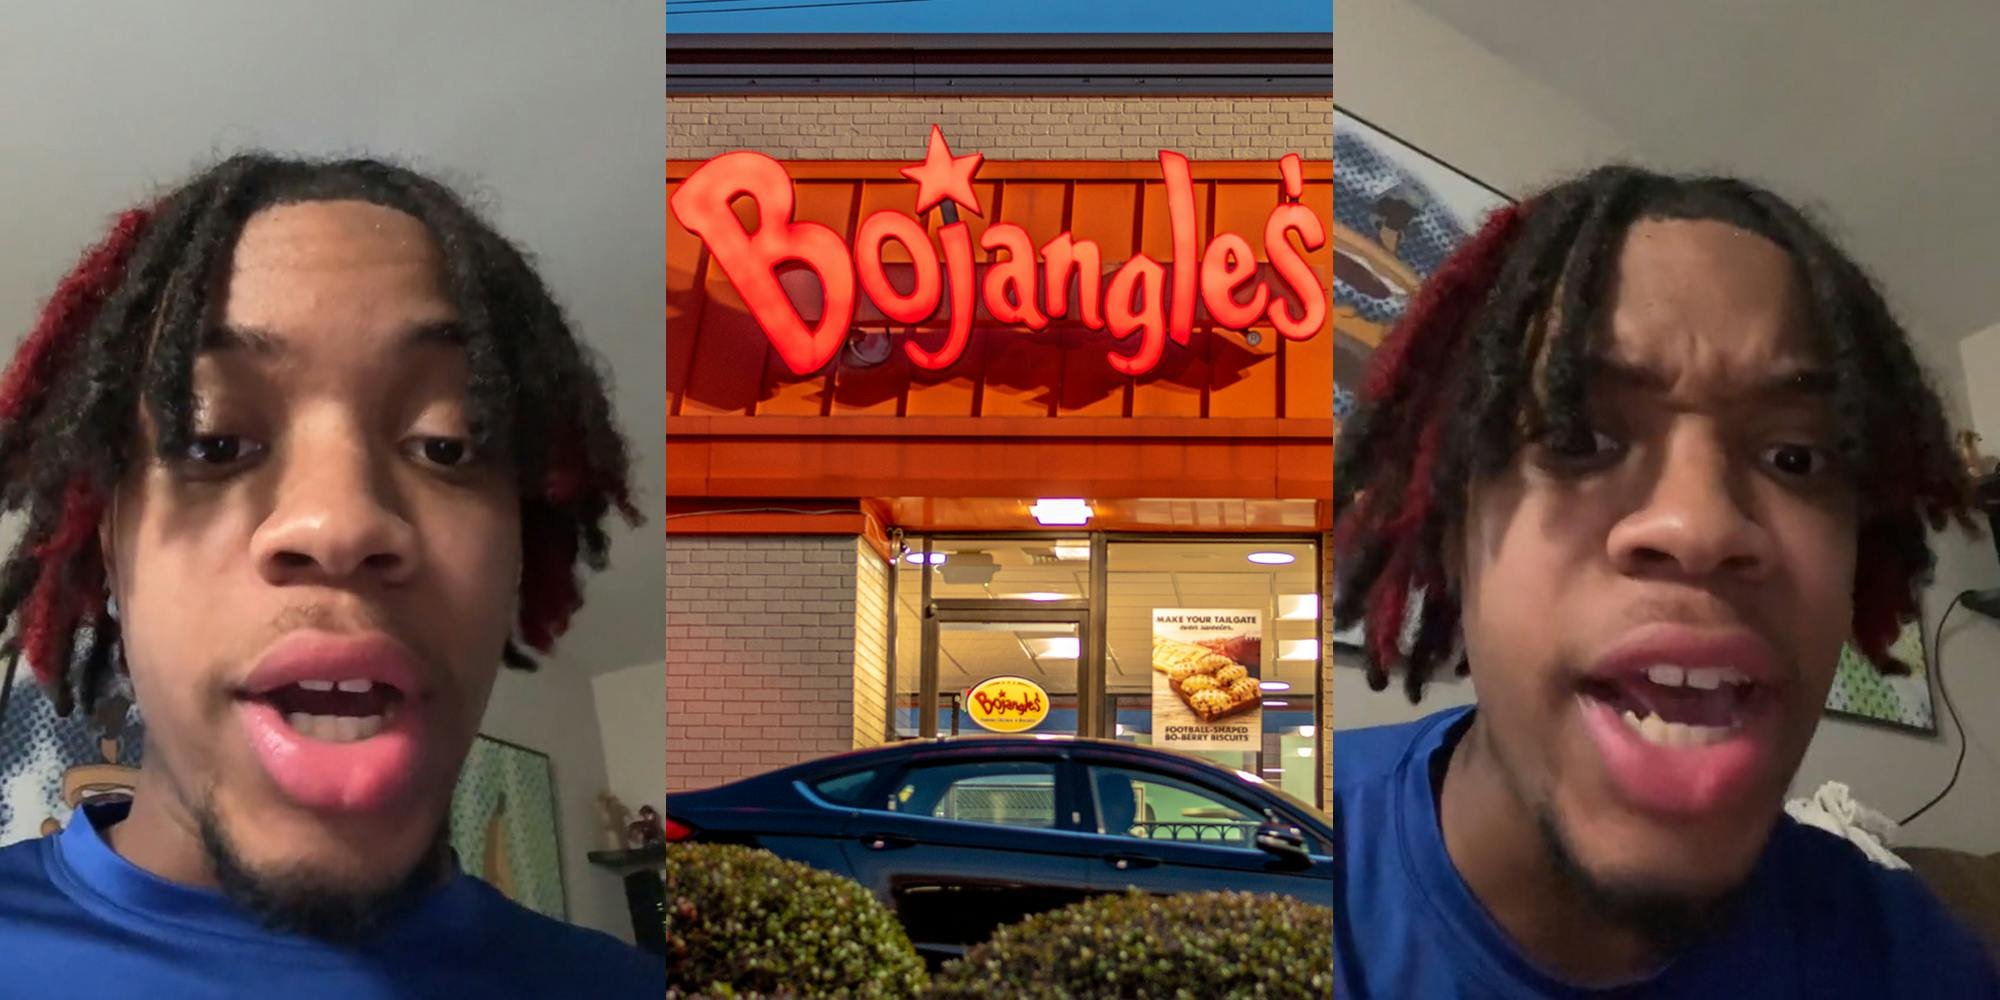 'I didn't sign up to feed the 5,000': Customer ends pay-it-forward line at Bojangles after finding out person behind him ordered $45 worth of food